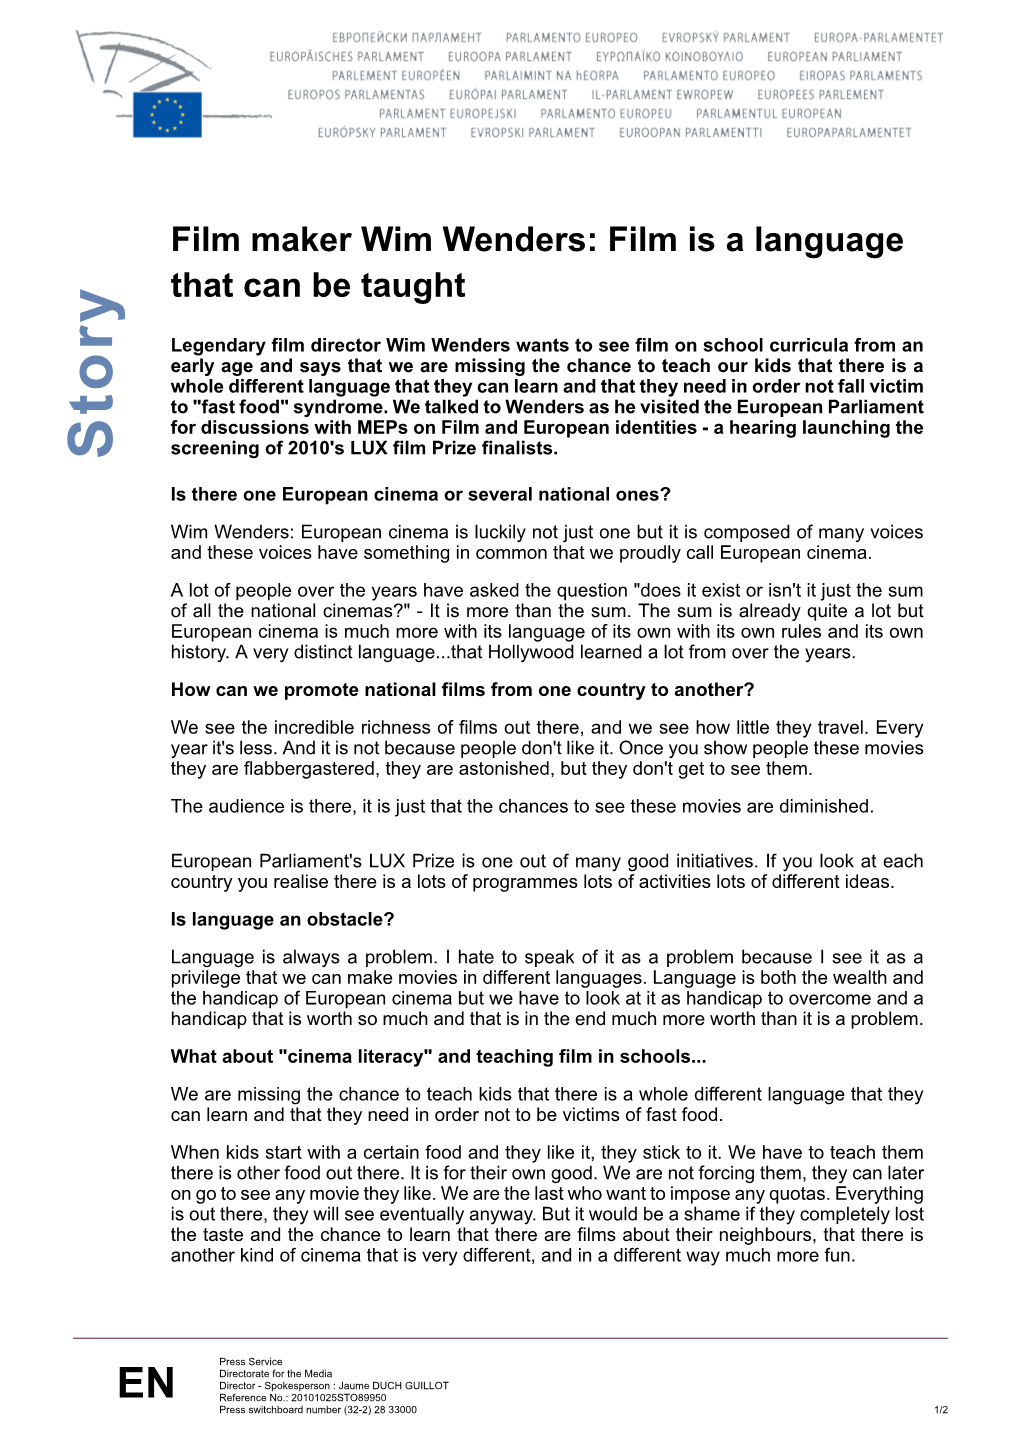 Film Maker Wim Wenders: Film Is a Language That Can Be Taught